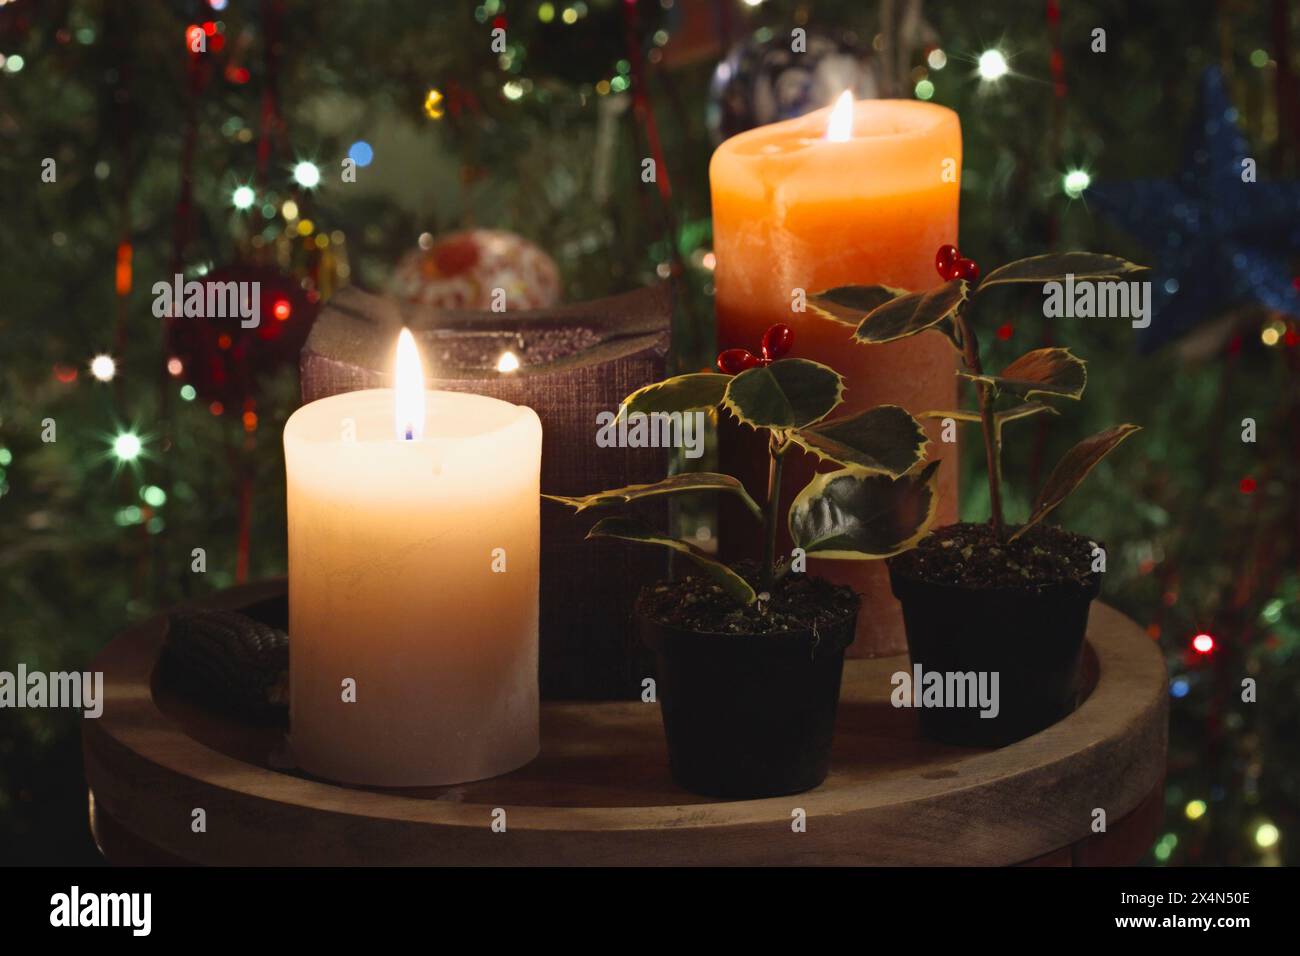 Italy, Christmas, Butcher's broon (Ruscus aculeatus) and candles with a Christmas tree behind Stock Photo